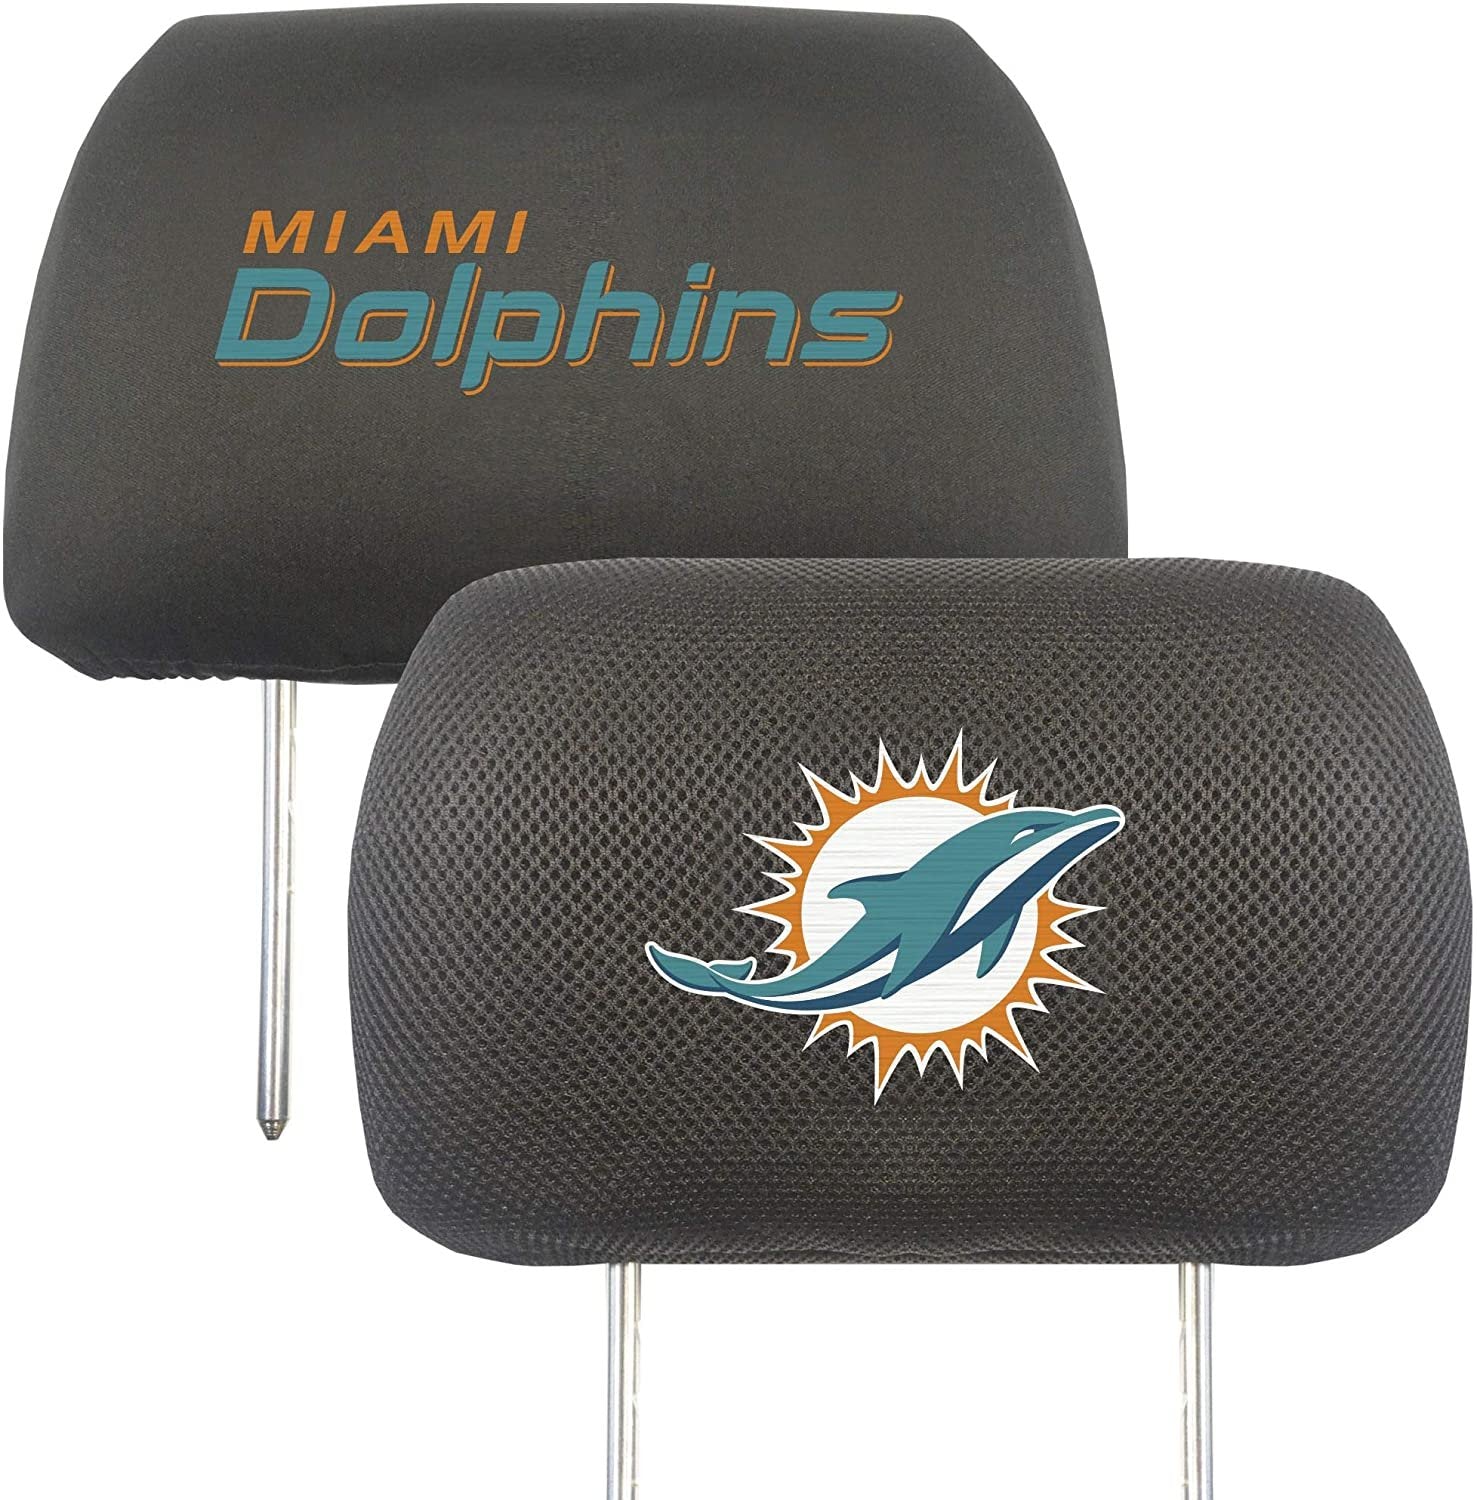 Miami Dolphins Pair of Premium Auto Head Rest Covers, Embroidered, Black Elastic, 14x10 Inch